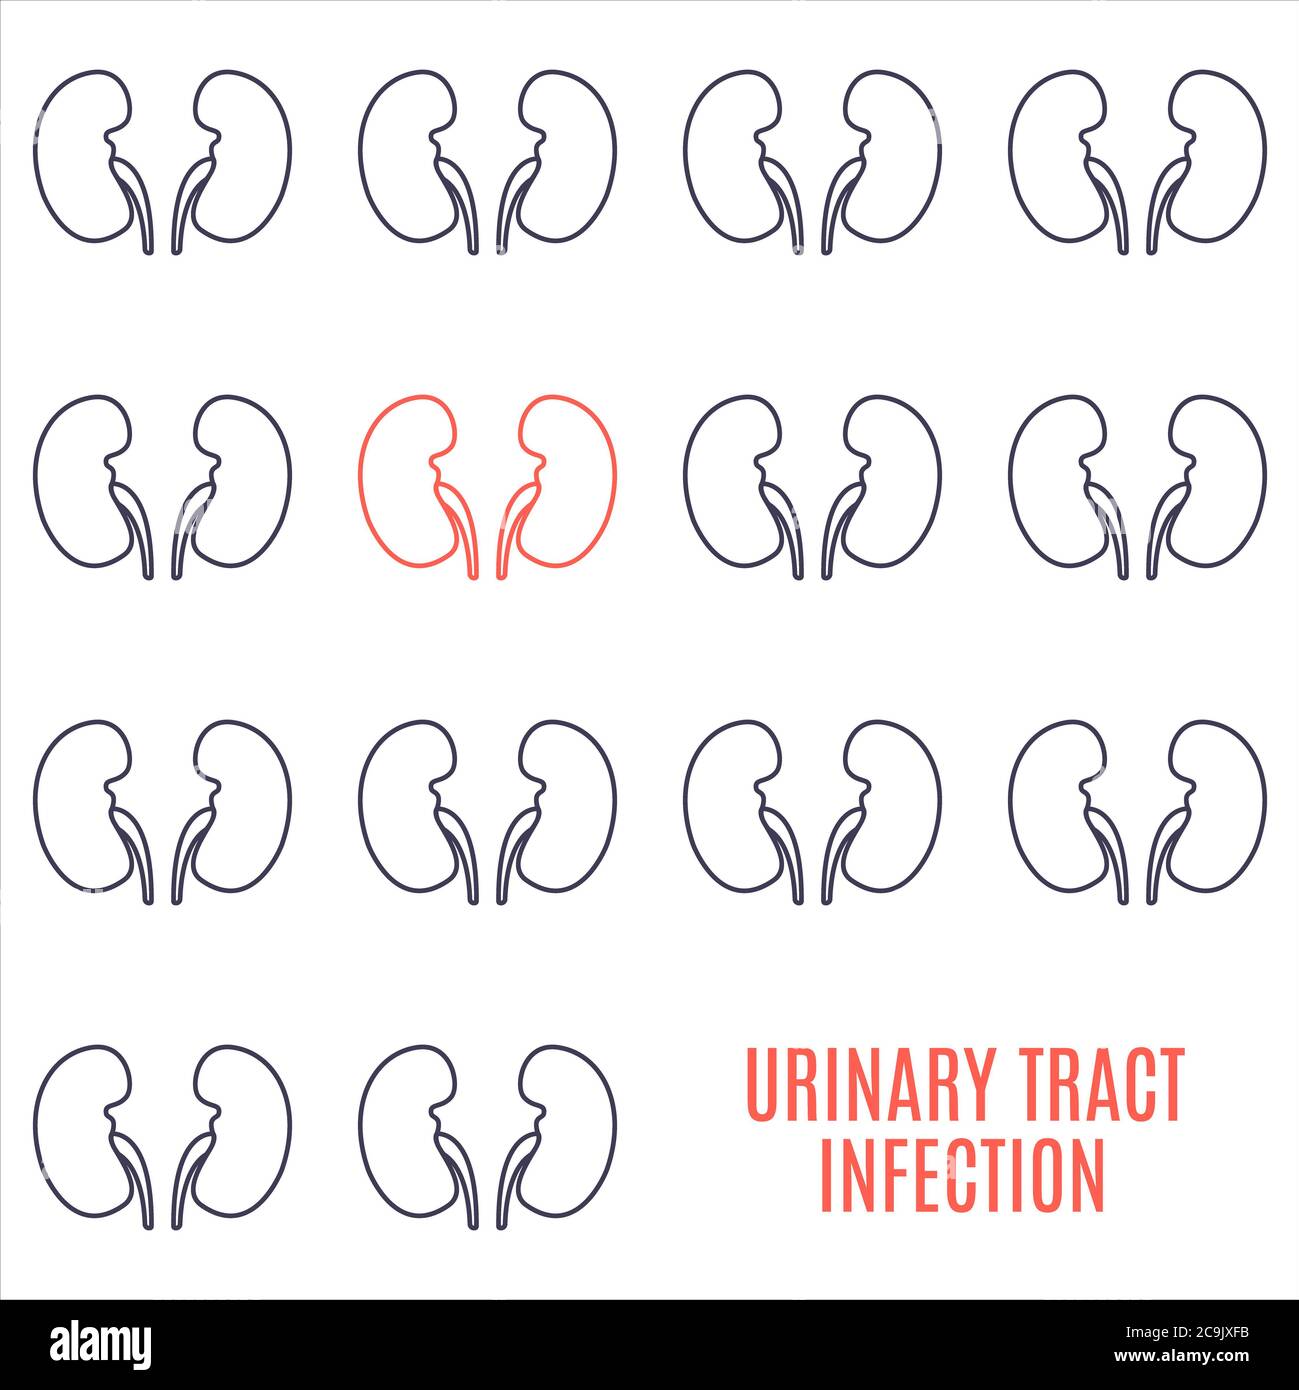 Urinary tract infection, conceptual illustration. Stock Photo